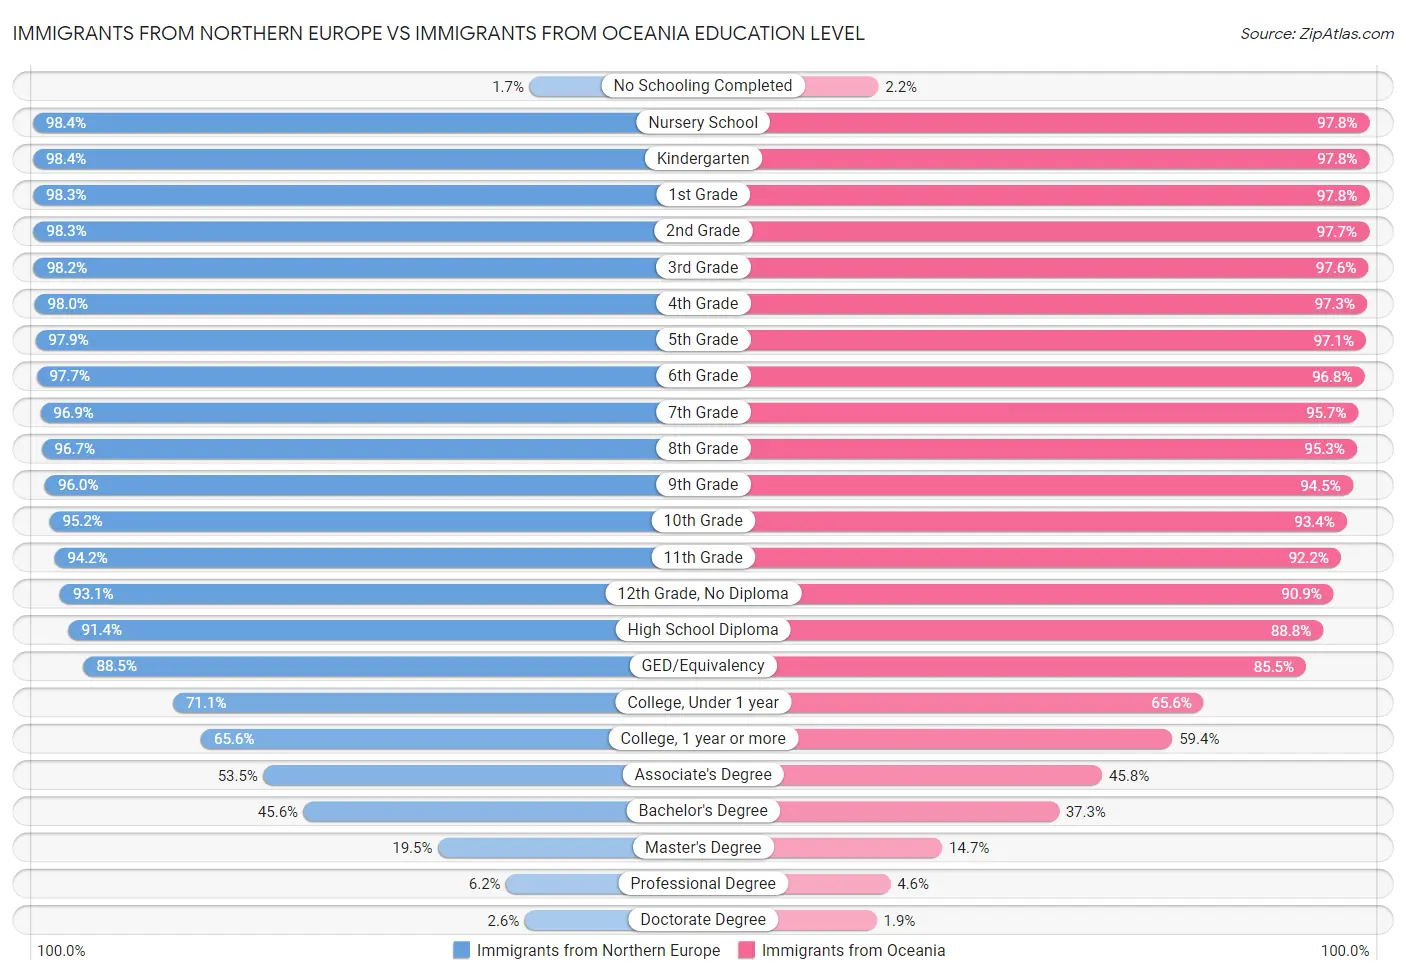 Immigrants from Northern Europe vs Immigrants from Oceania Education Level